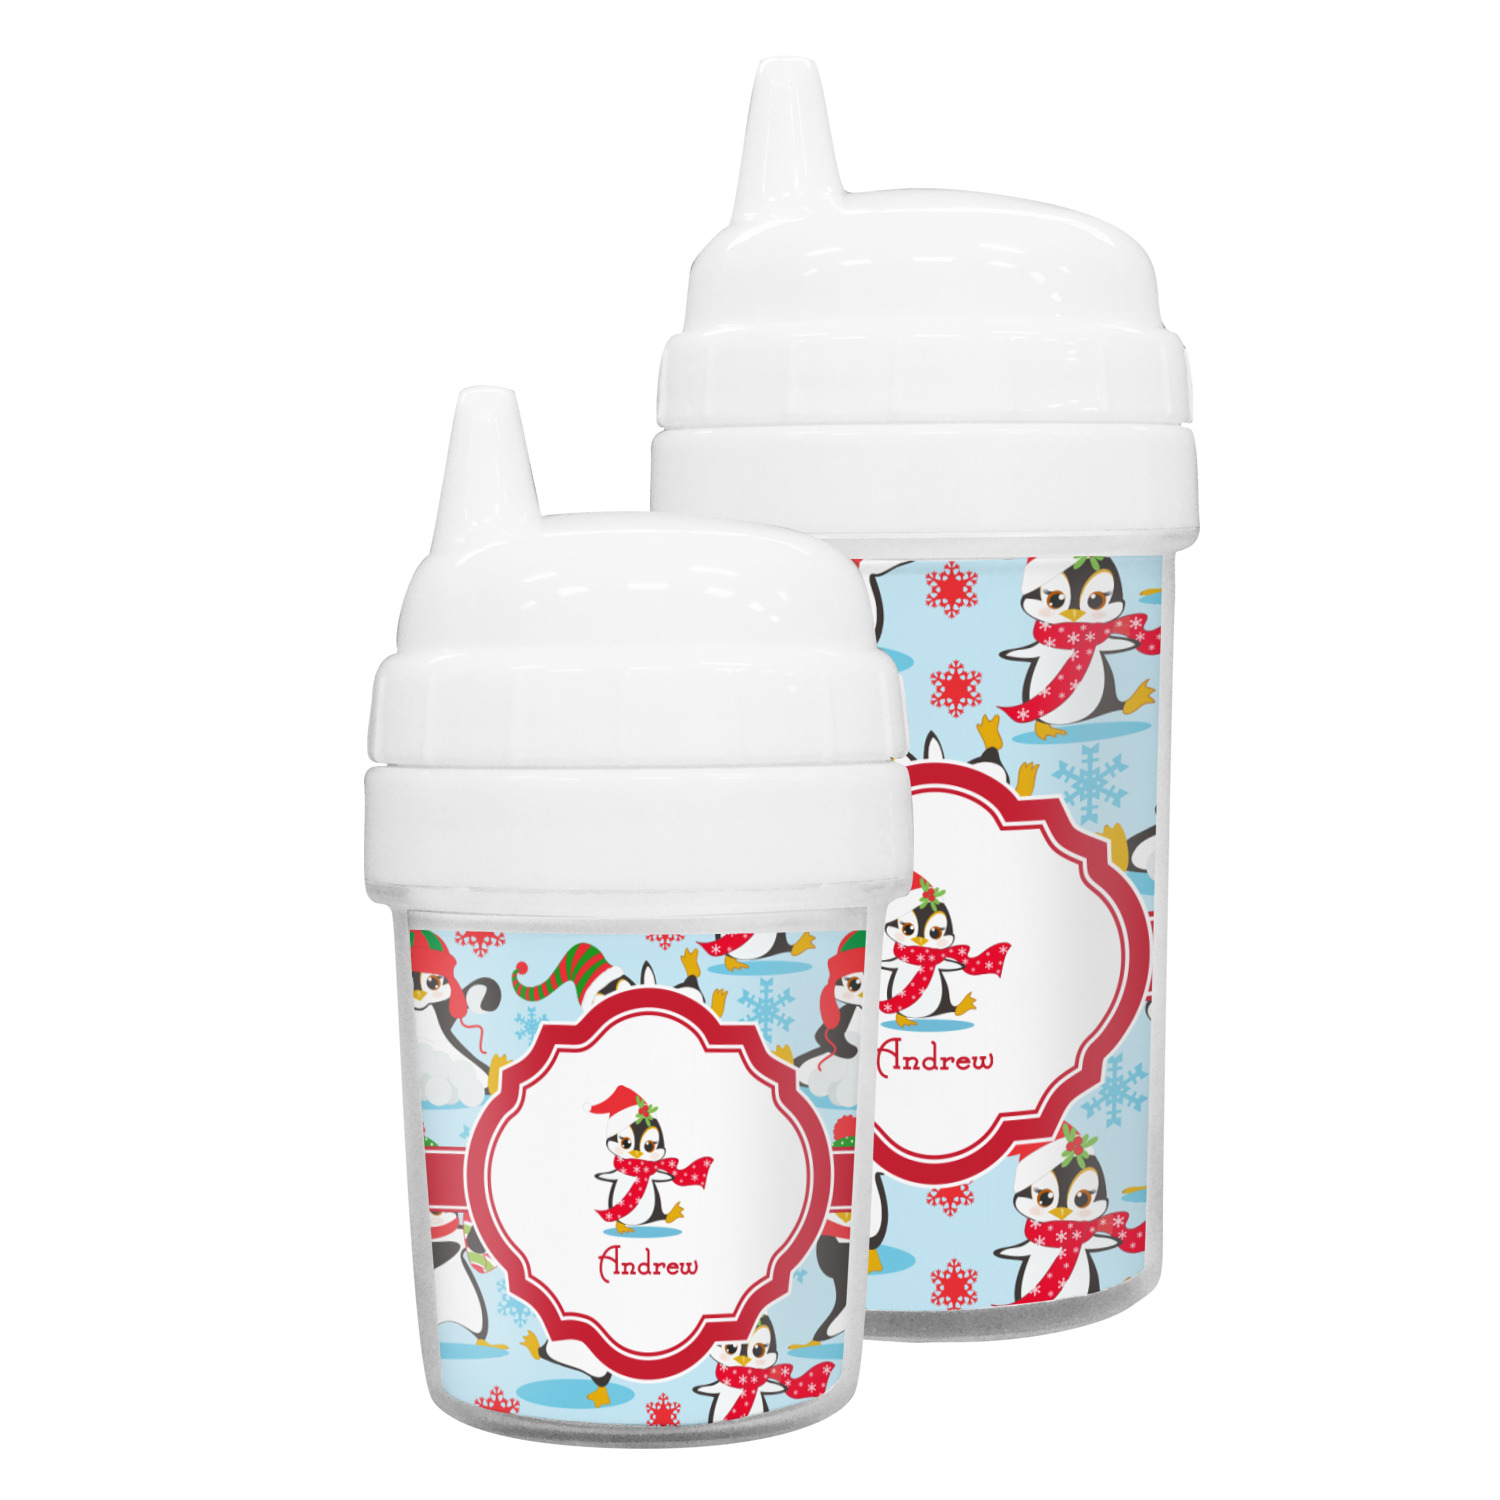 Personalized Red and Black Pirate Mouse Ears Toddler Cup with Lid and Built in Straw Sippy Cup 